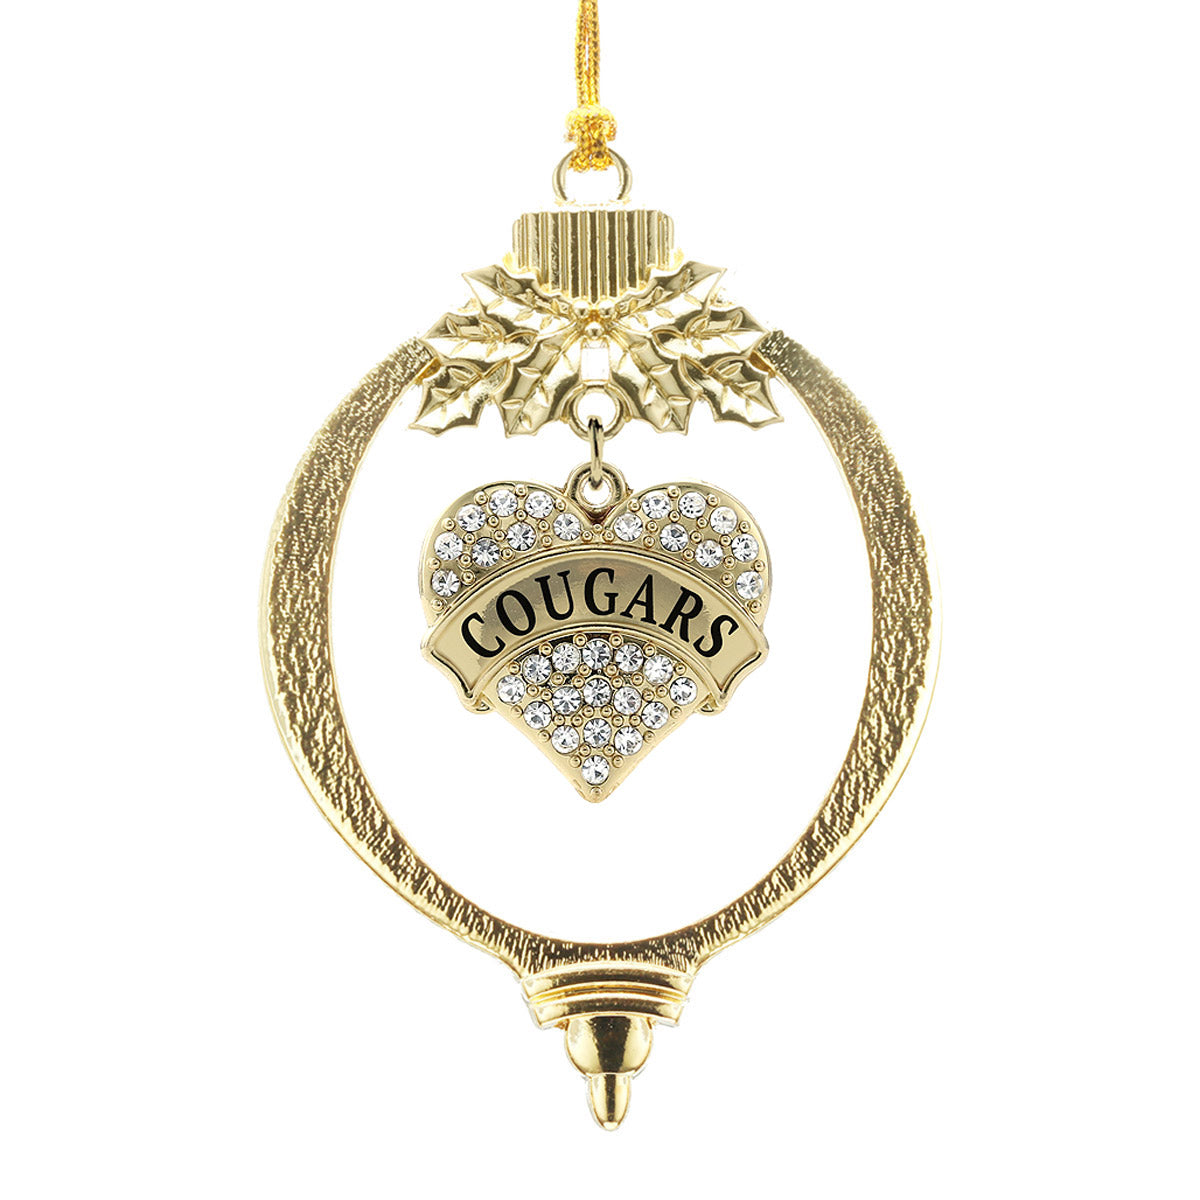 Gold Cougars Pave Heart Charm Holiday Ornament